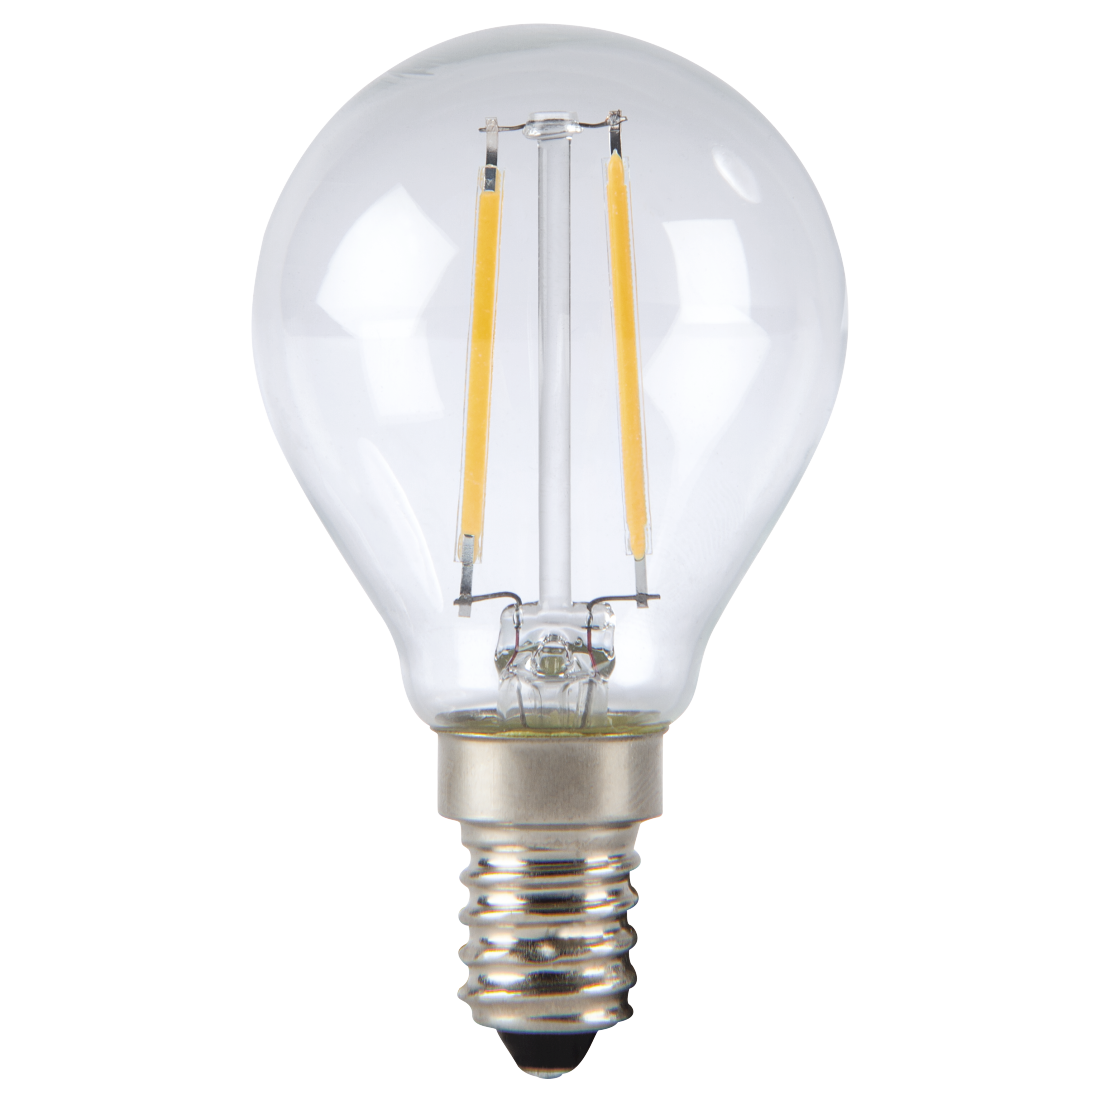 abx High-Res Image - Xavax, LED Filament, E14, 250 lm Replaces 25W, Drop Bulb, warm white